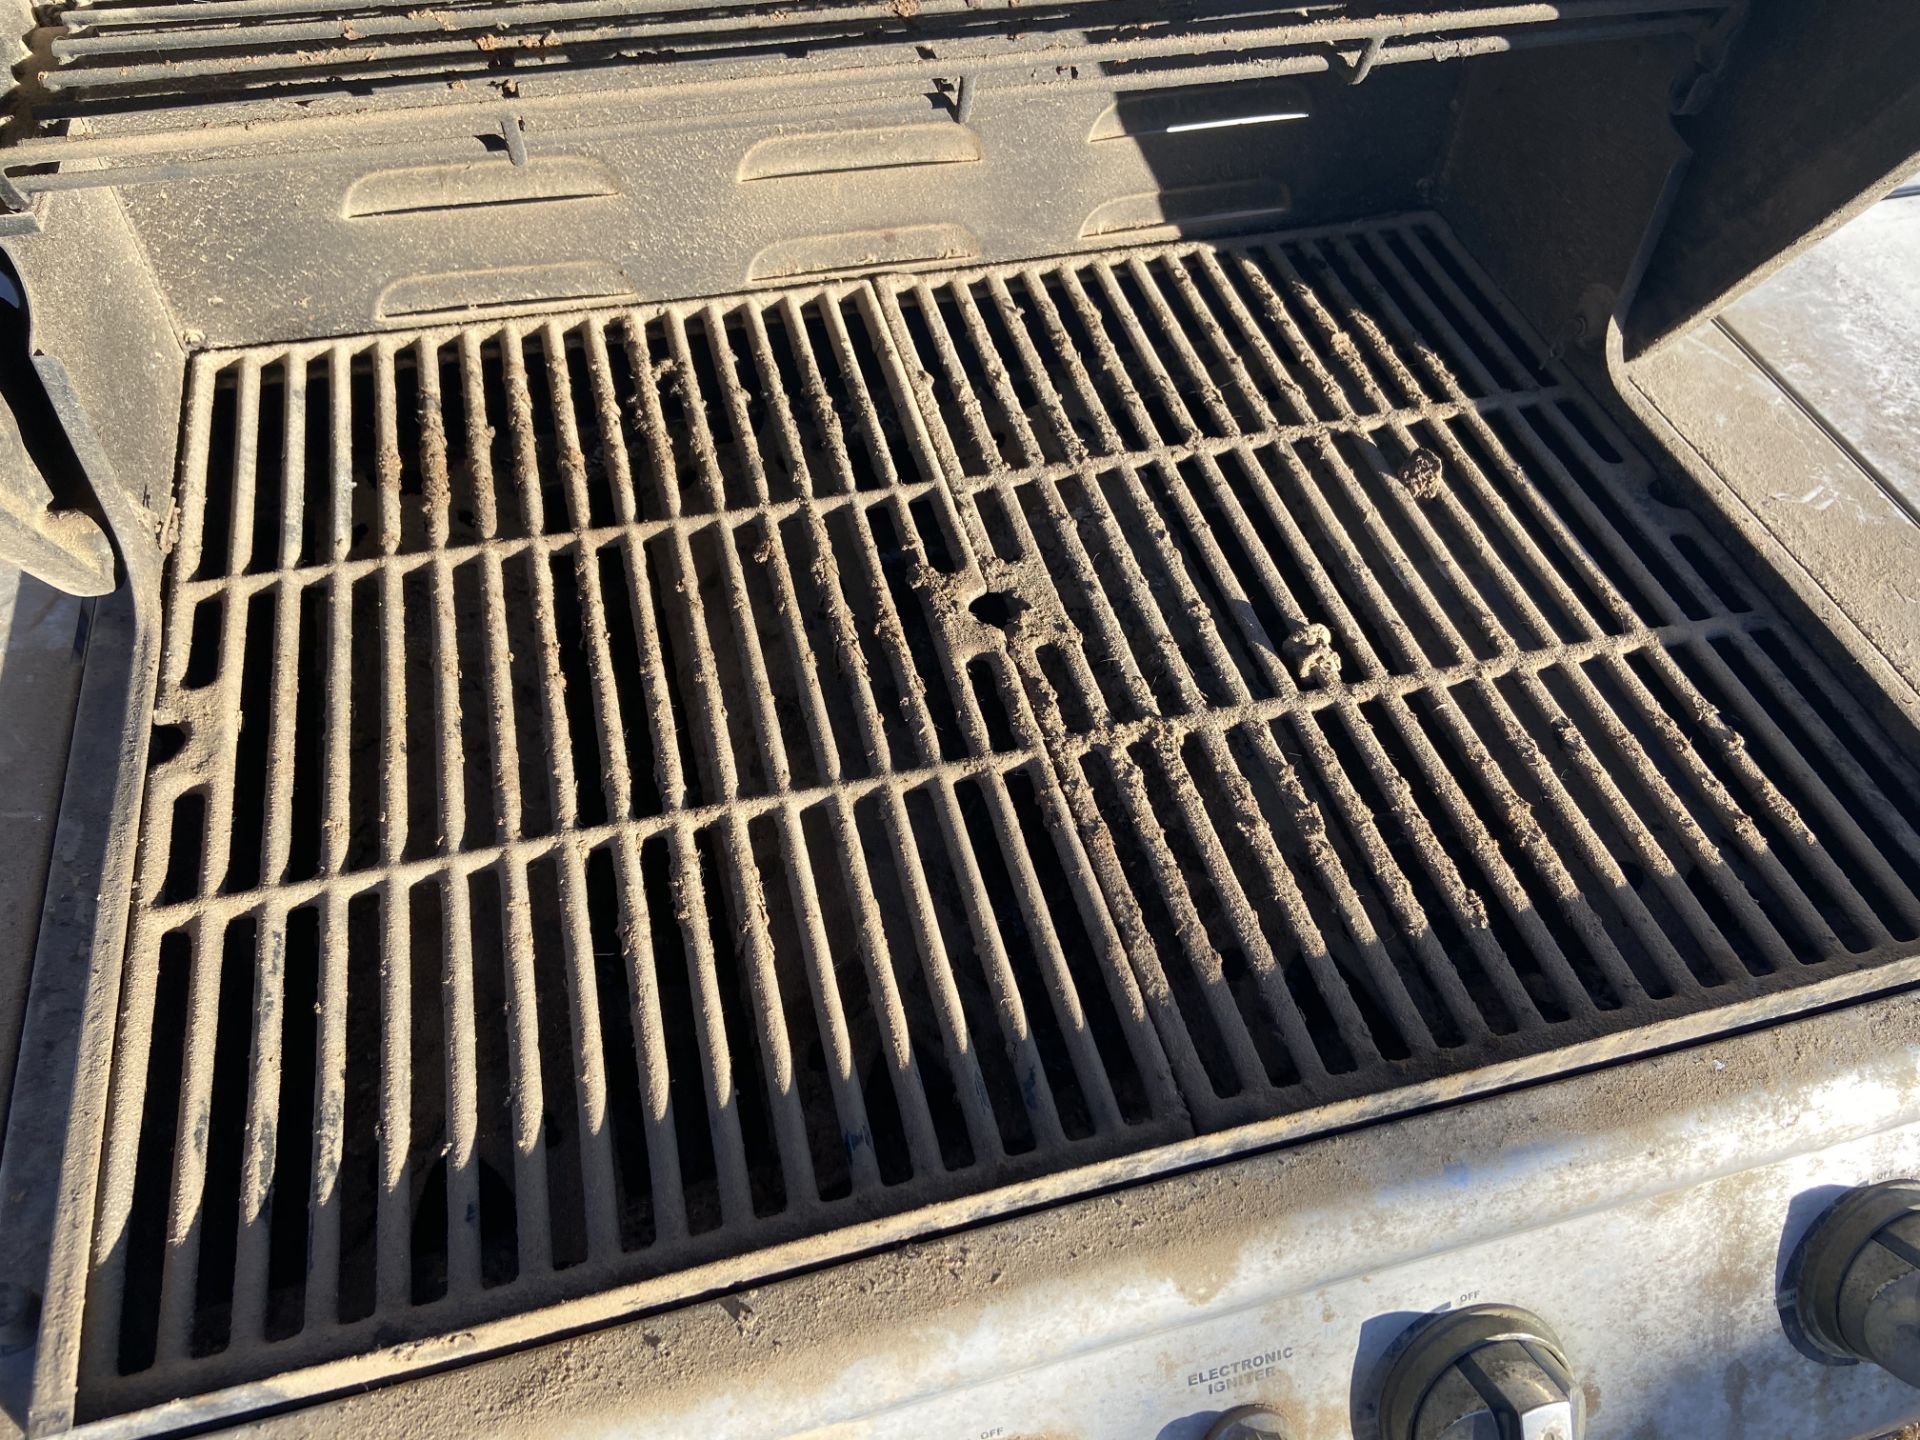 Gas BBQ Pit, Rigging/ Loading Fee: $10 - Image 2 of 3